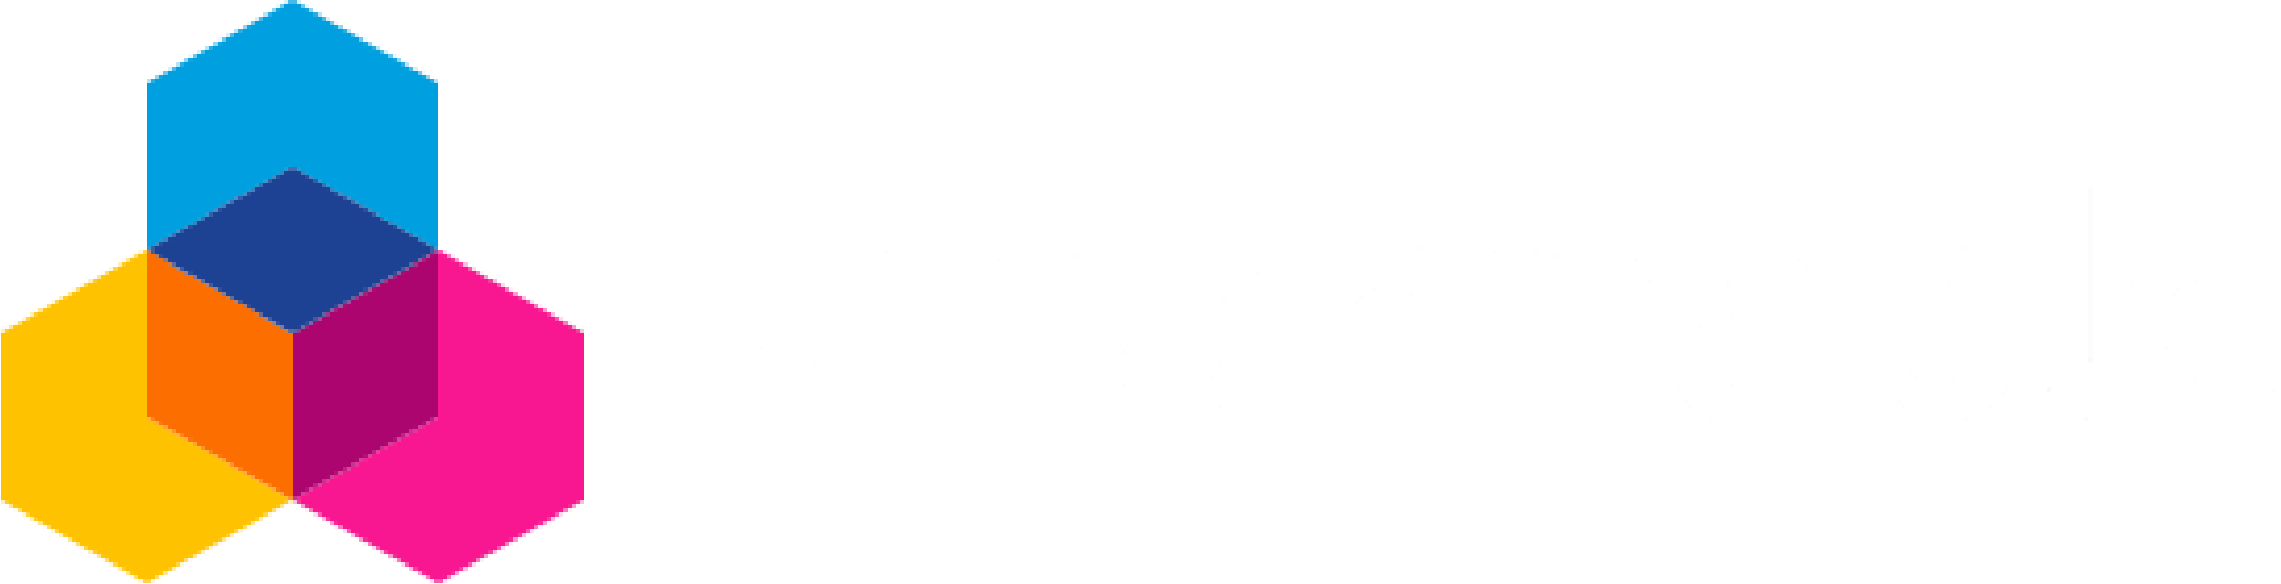 Channable-logo-wit